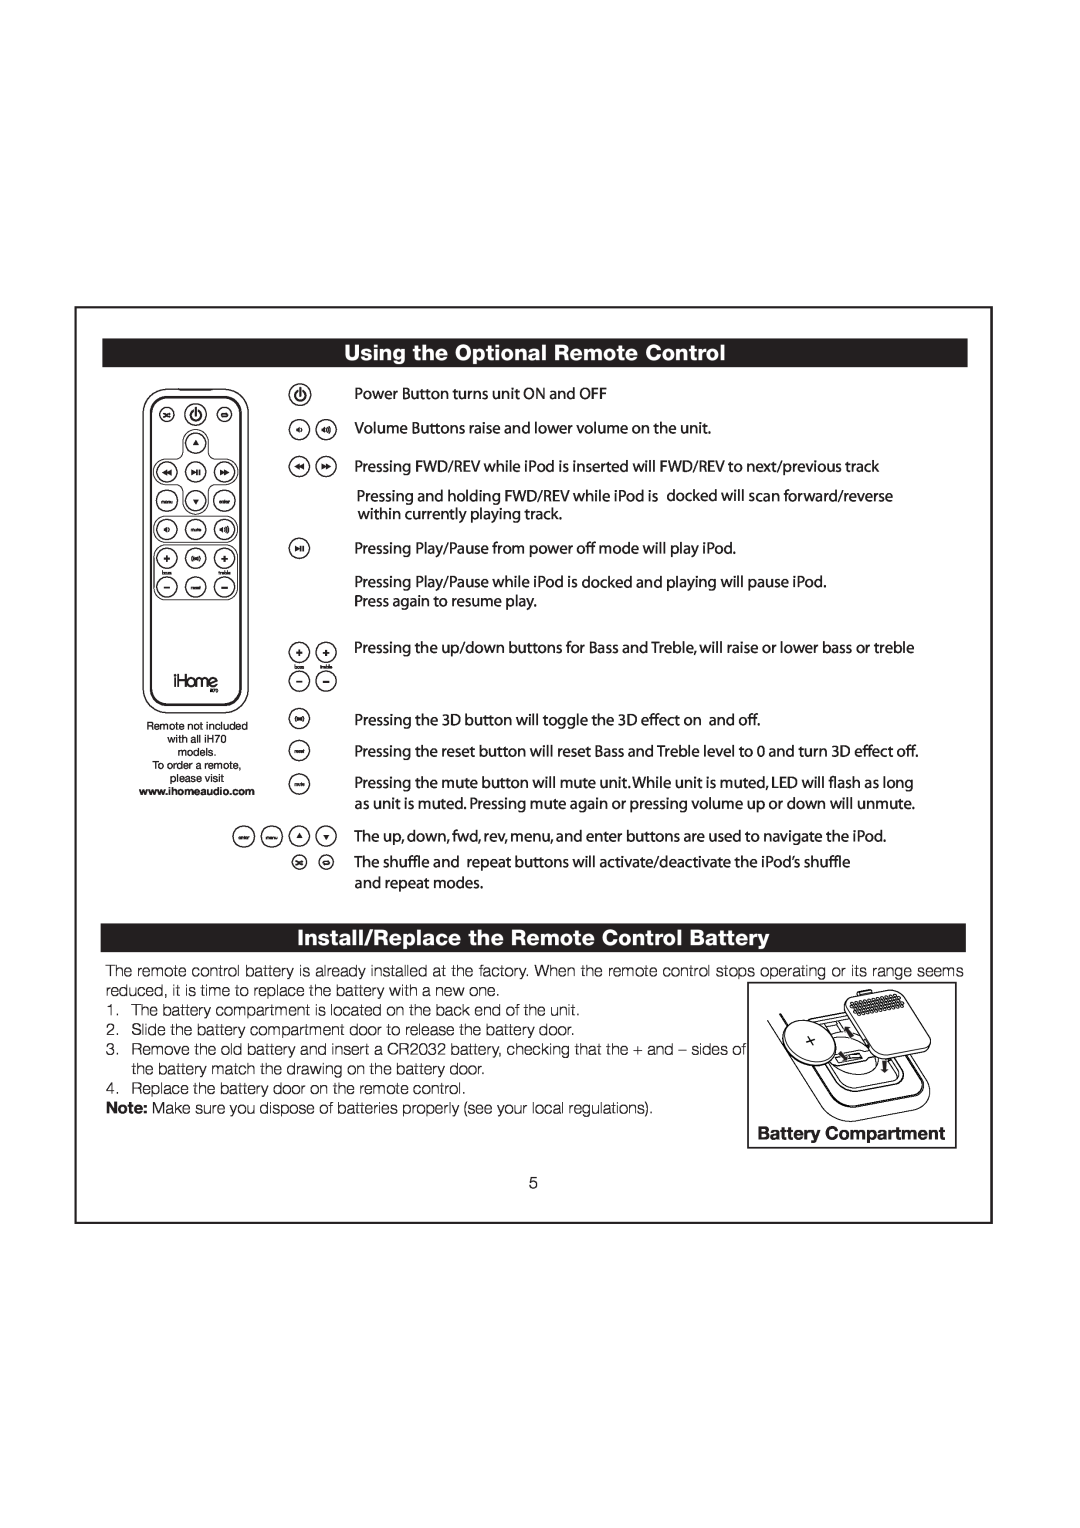 iHome iH70 manual Using the Optional Remote Control, Install/Replace the Remote Control Battery, Battery Compartment 